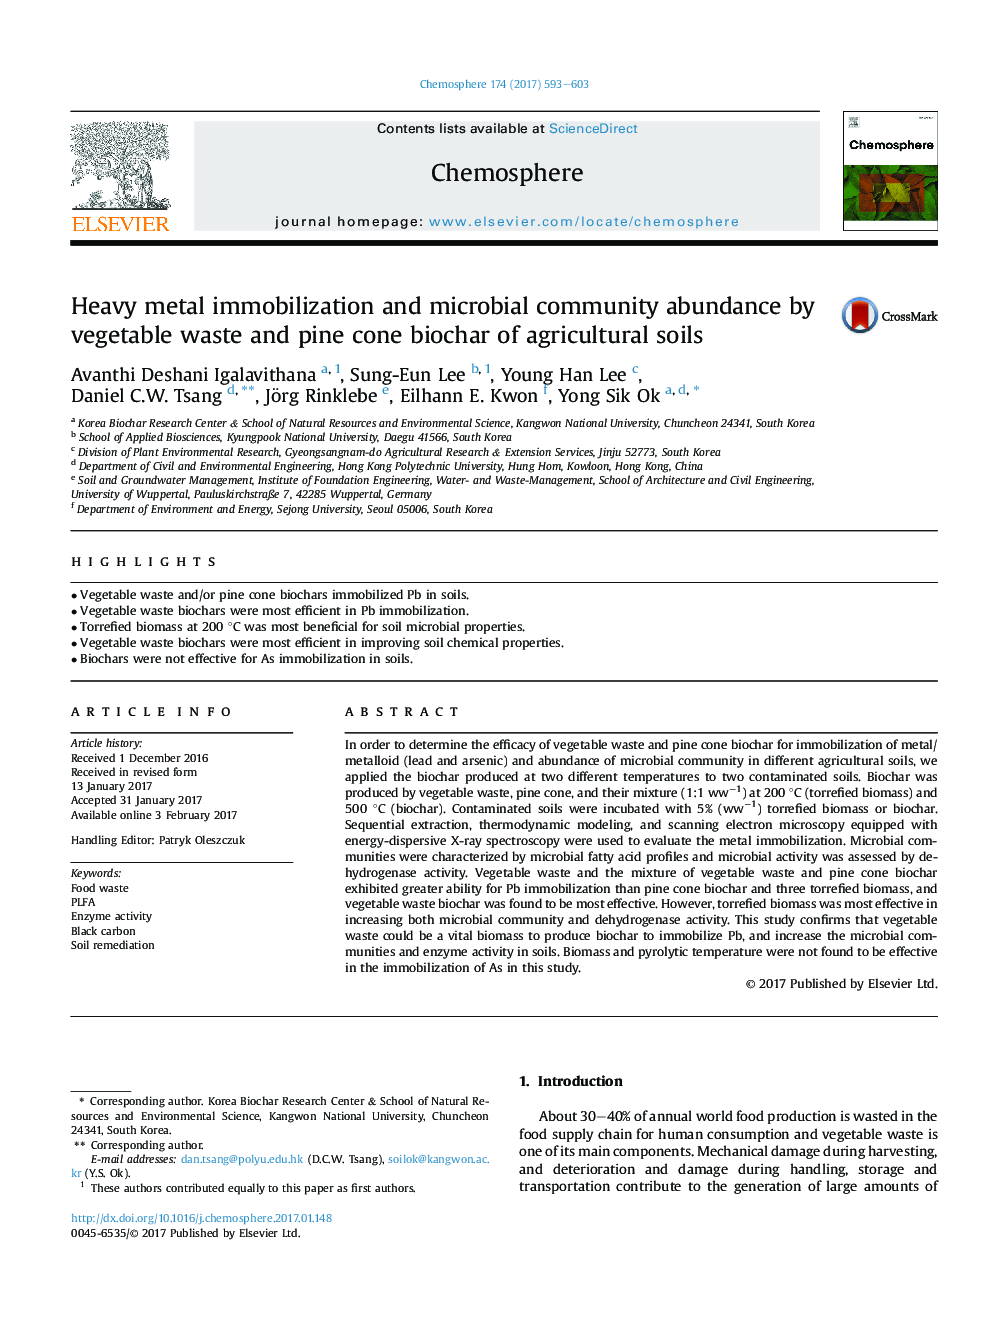 Heavy metal immobilization and microbial community abundance by vegetable waste and pine cone biochar of agricultural soils